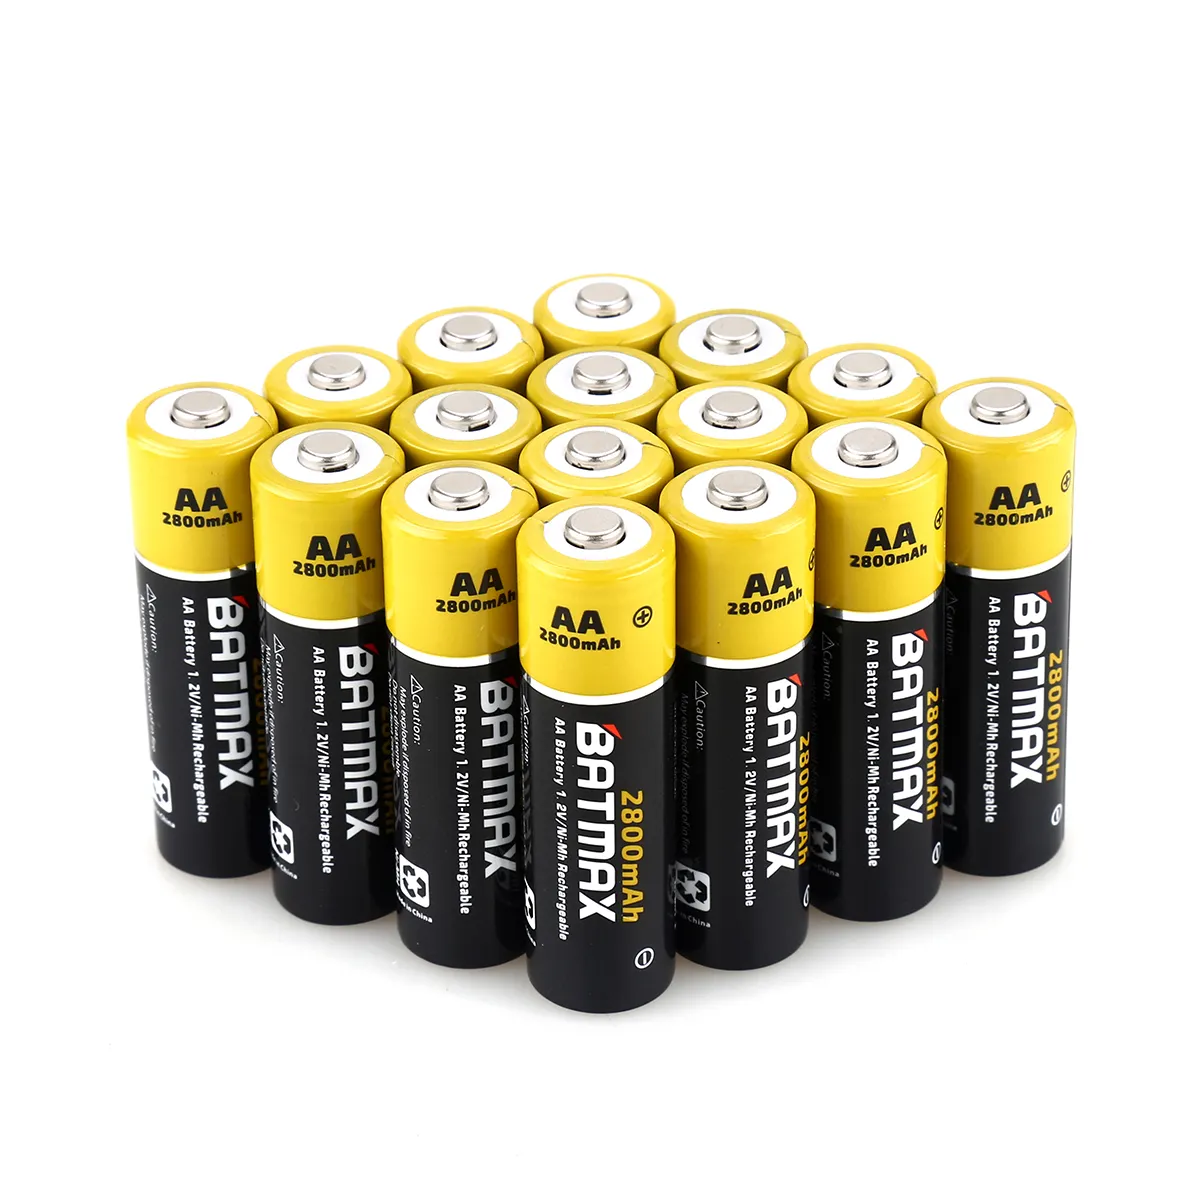 AA rechargeable battery 1.2V 2800mAh BATMAX replacement batteries flashlight toys watch MP3 player replace Ni-Mh batteria